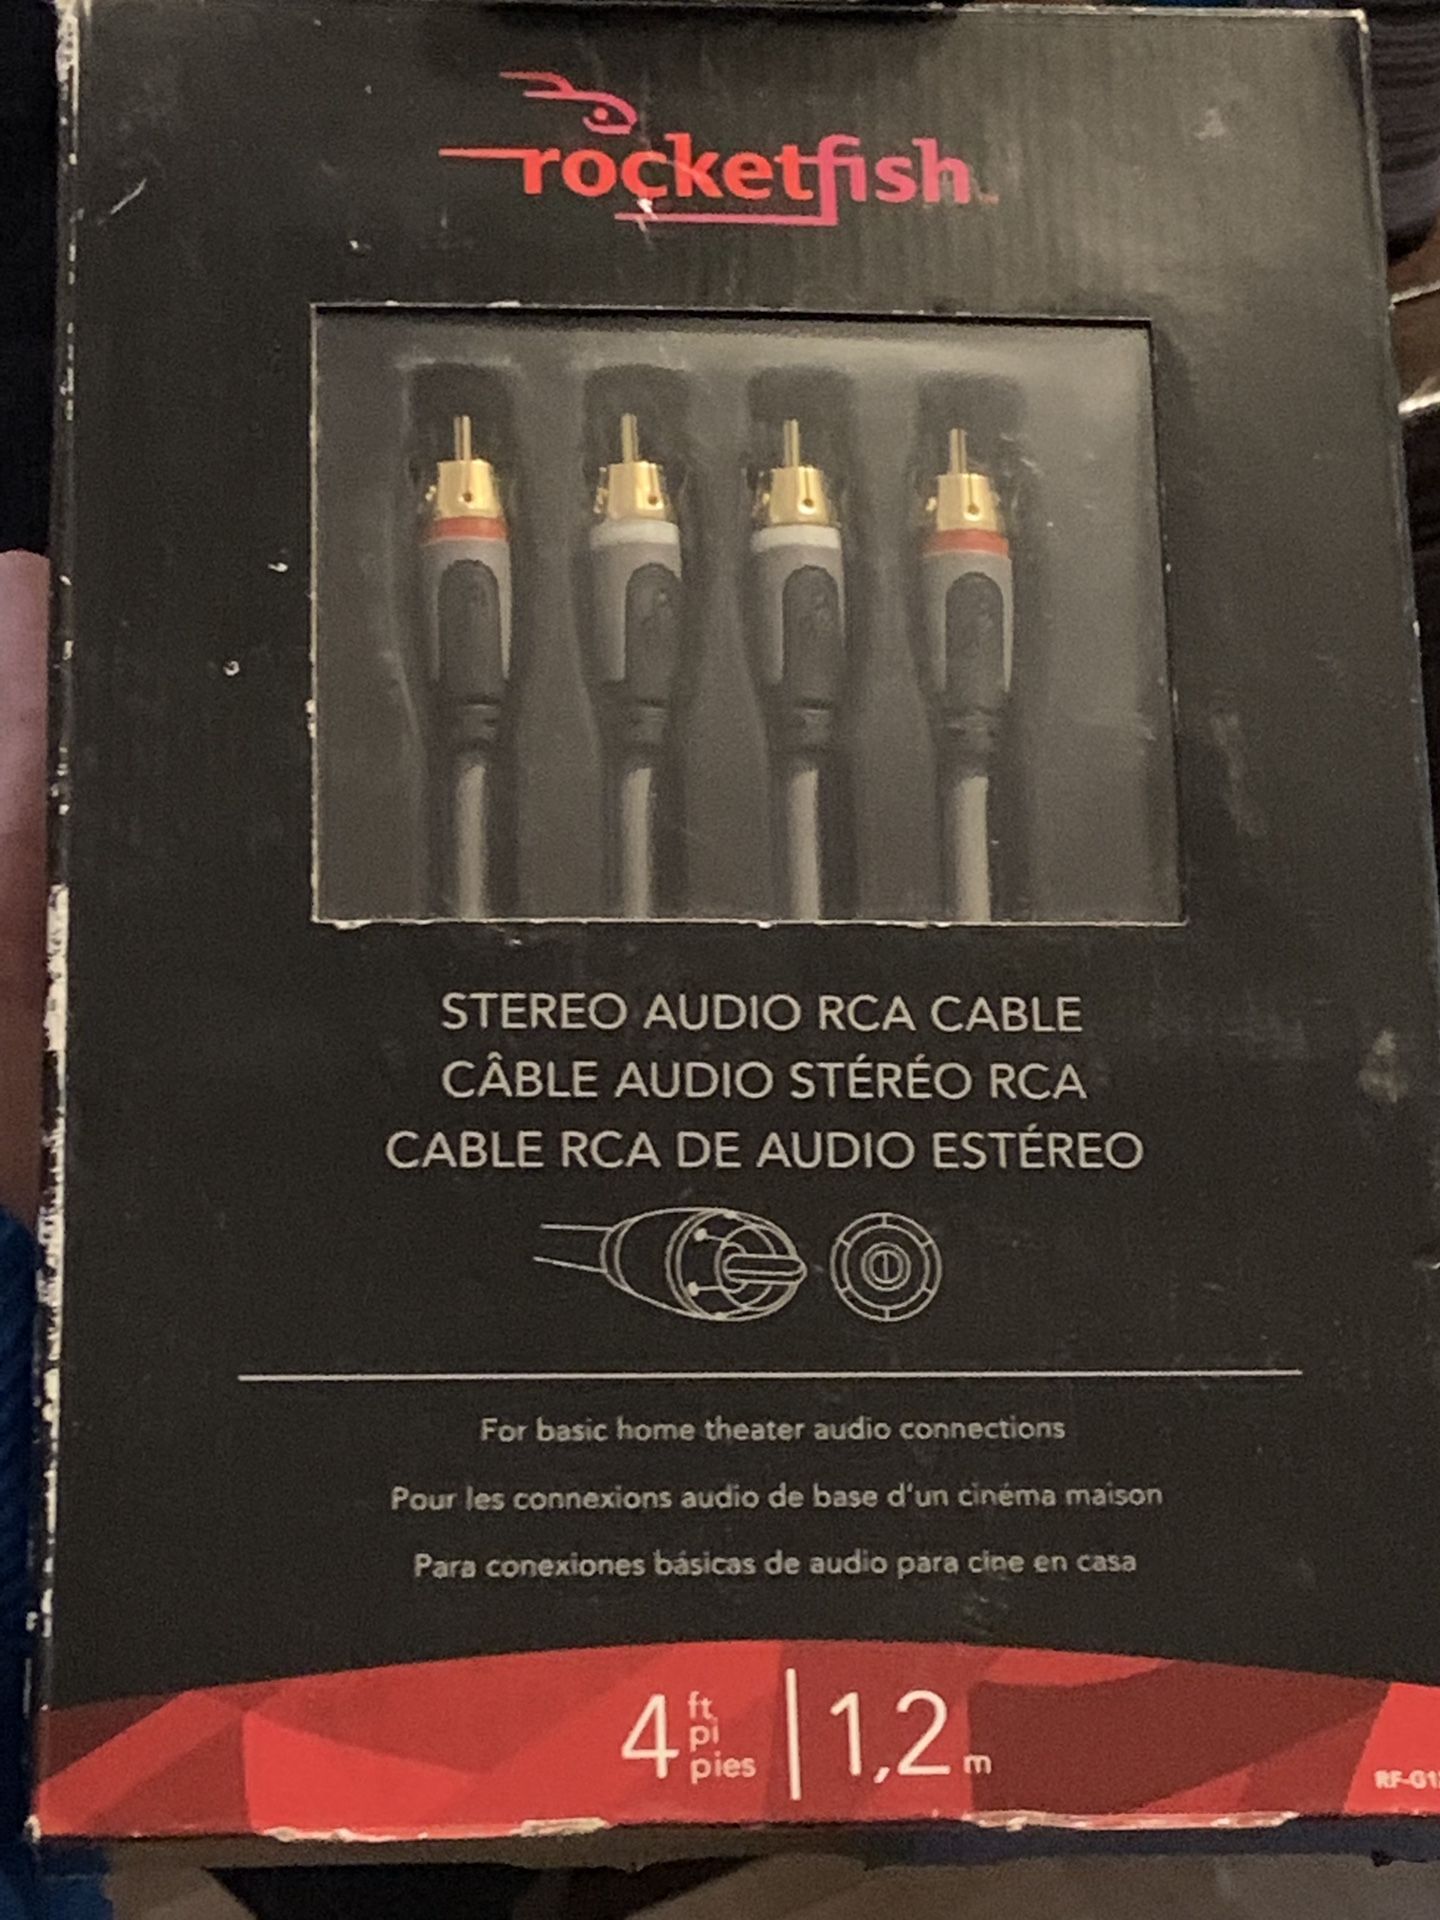 Stereo audio RCA cable